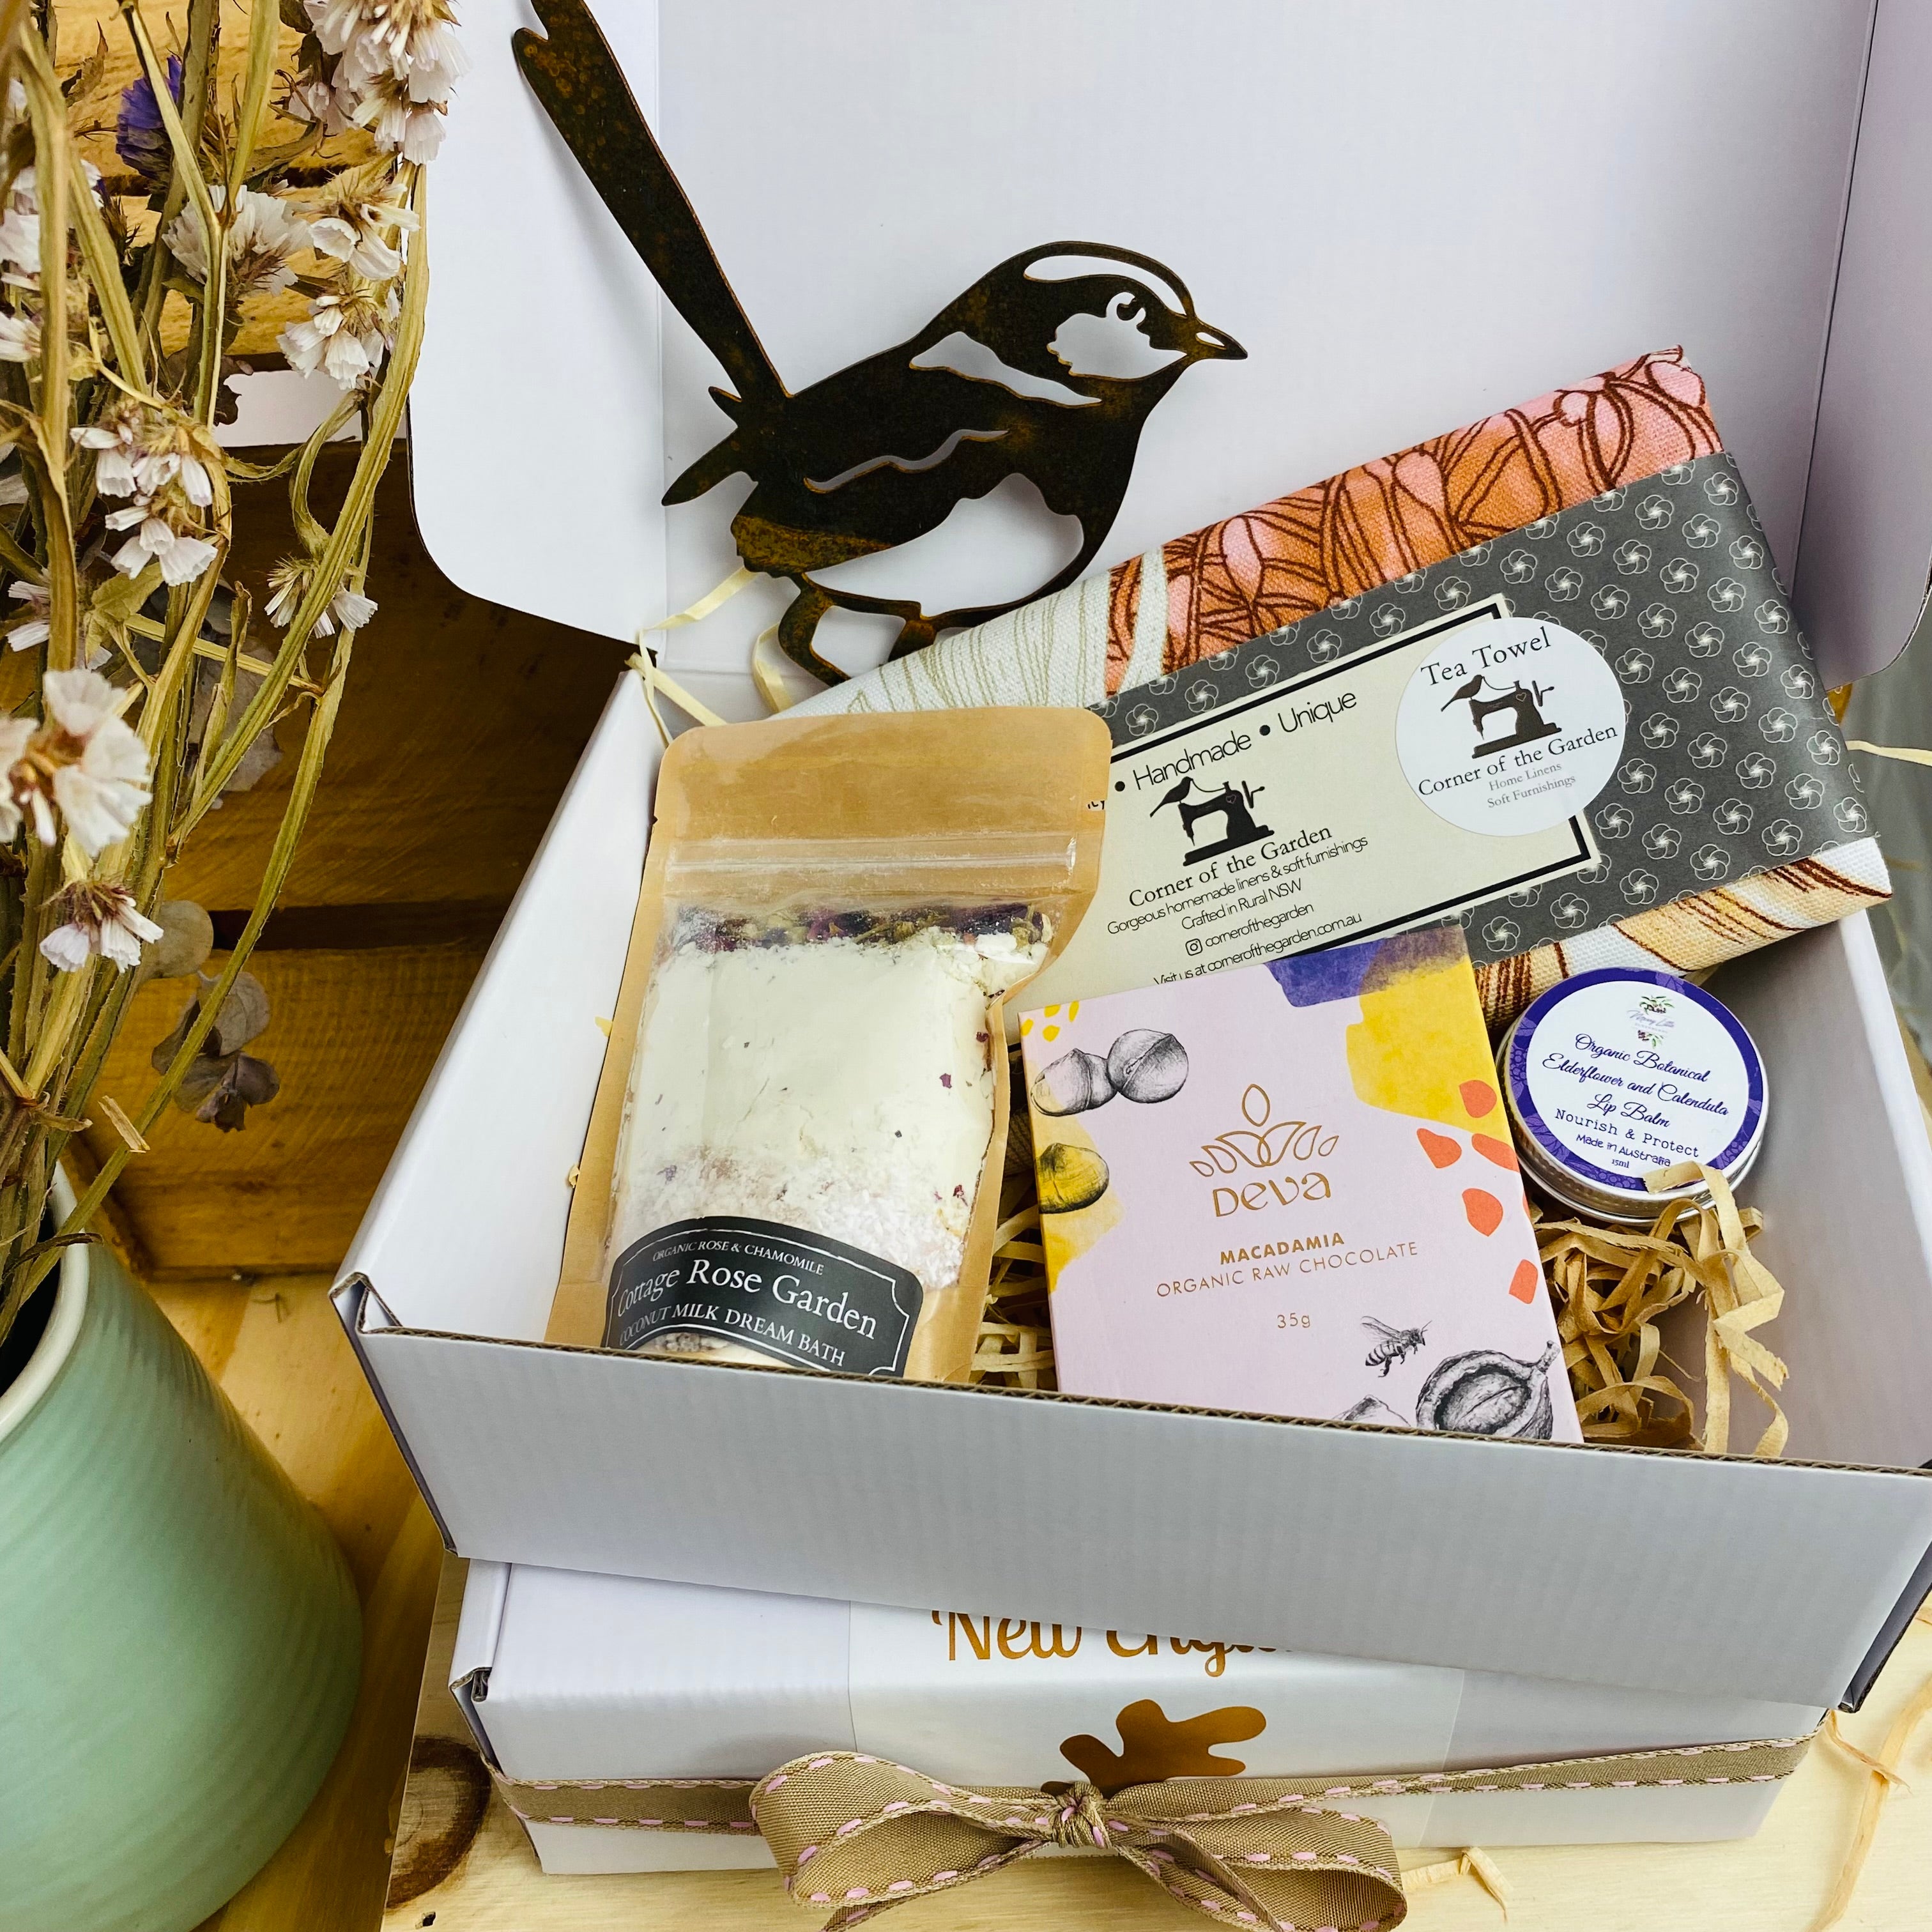 Get Well Soon - Hampers by Design